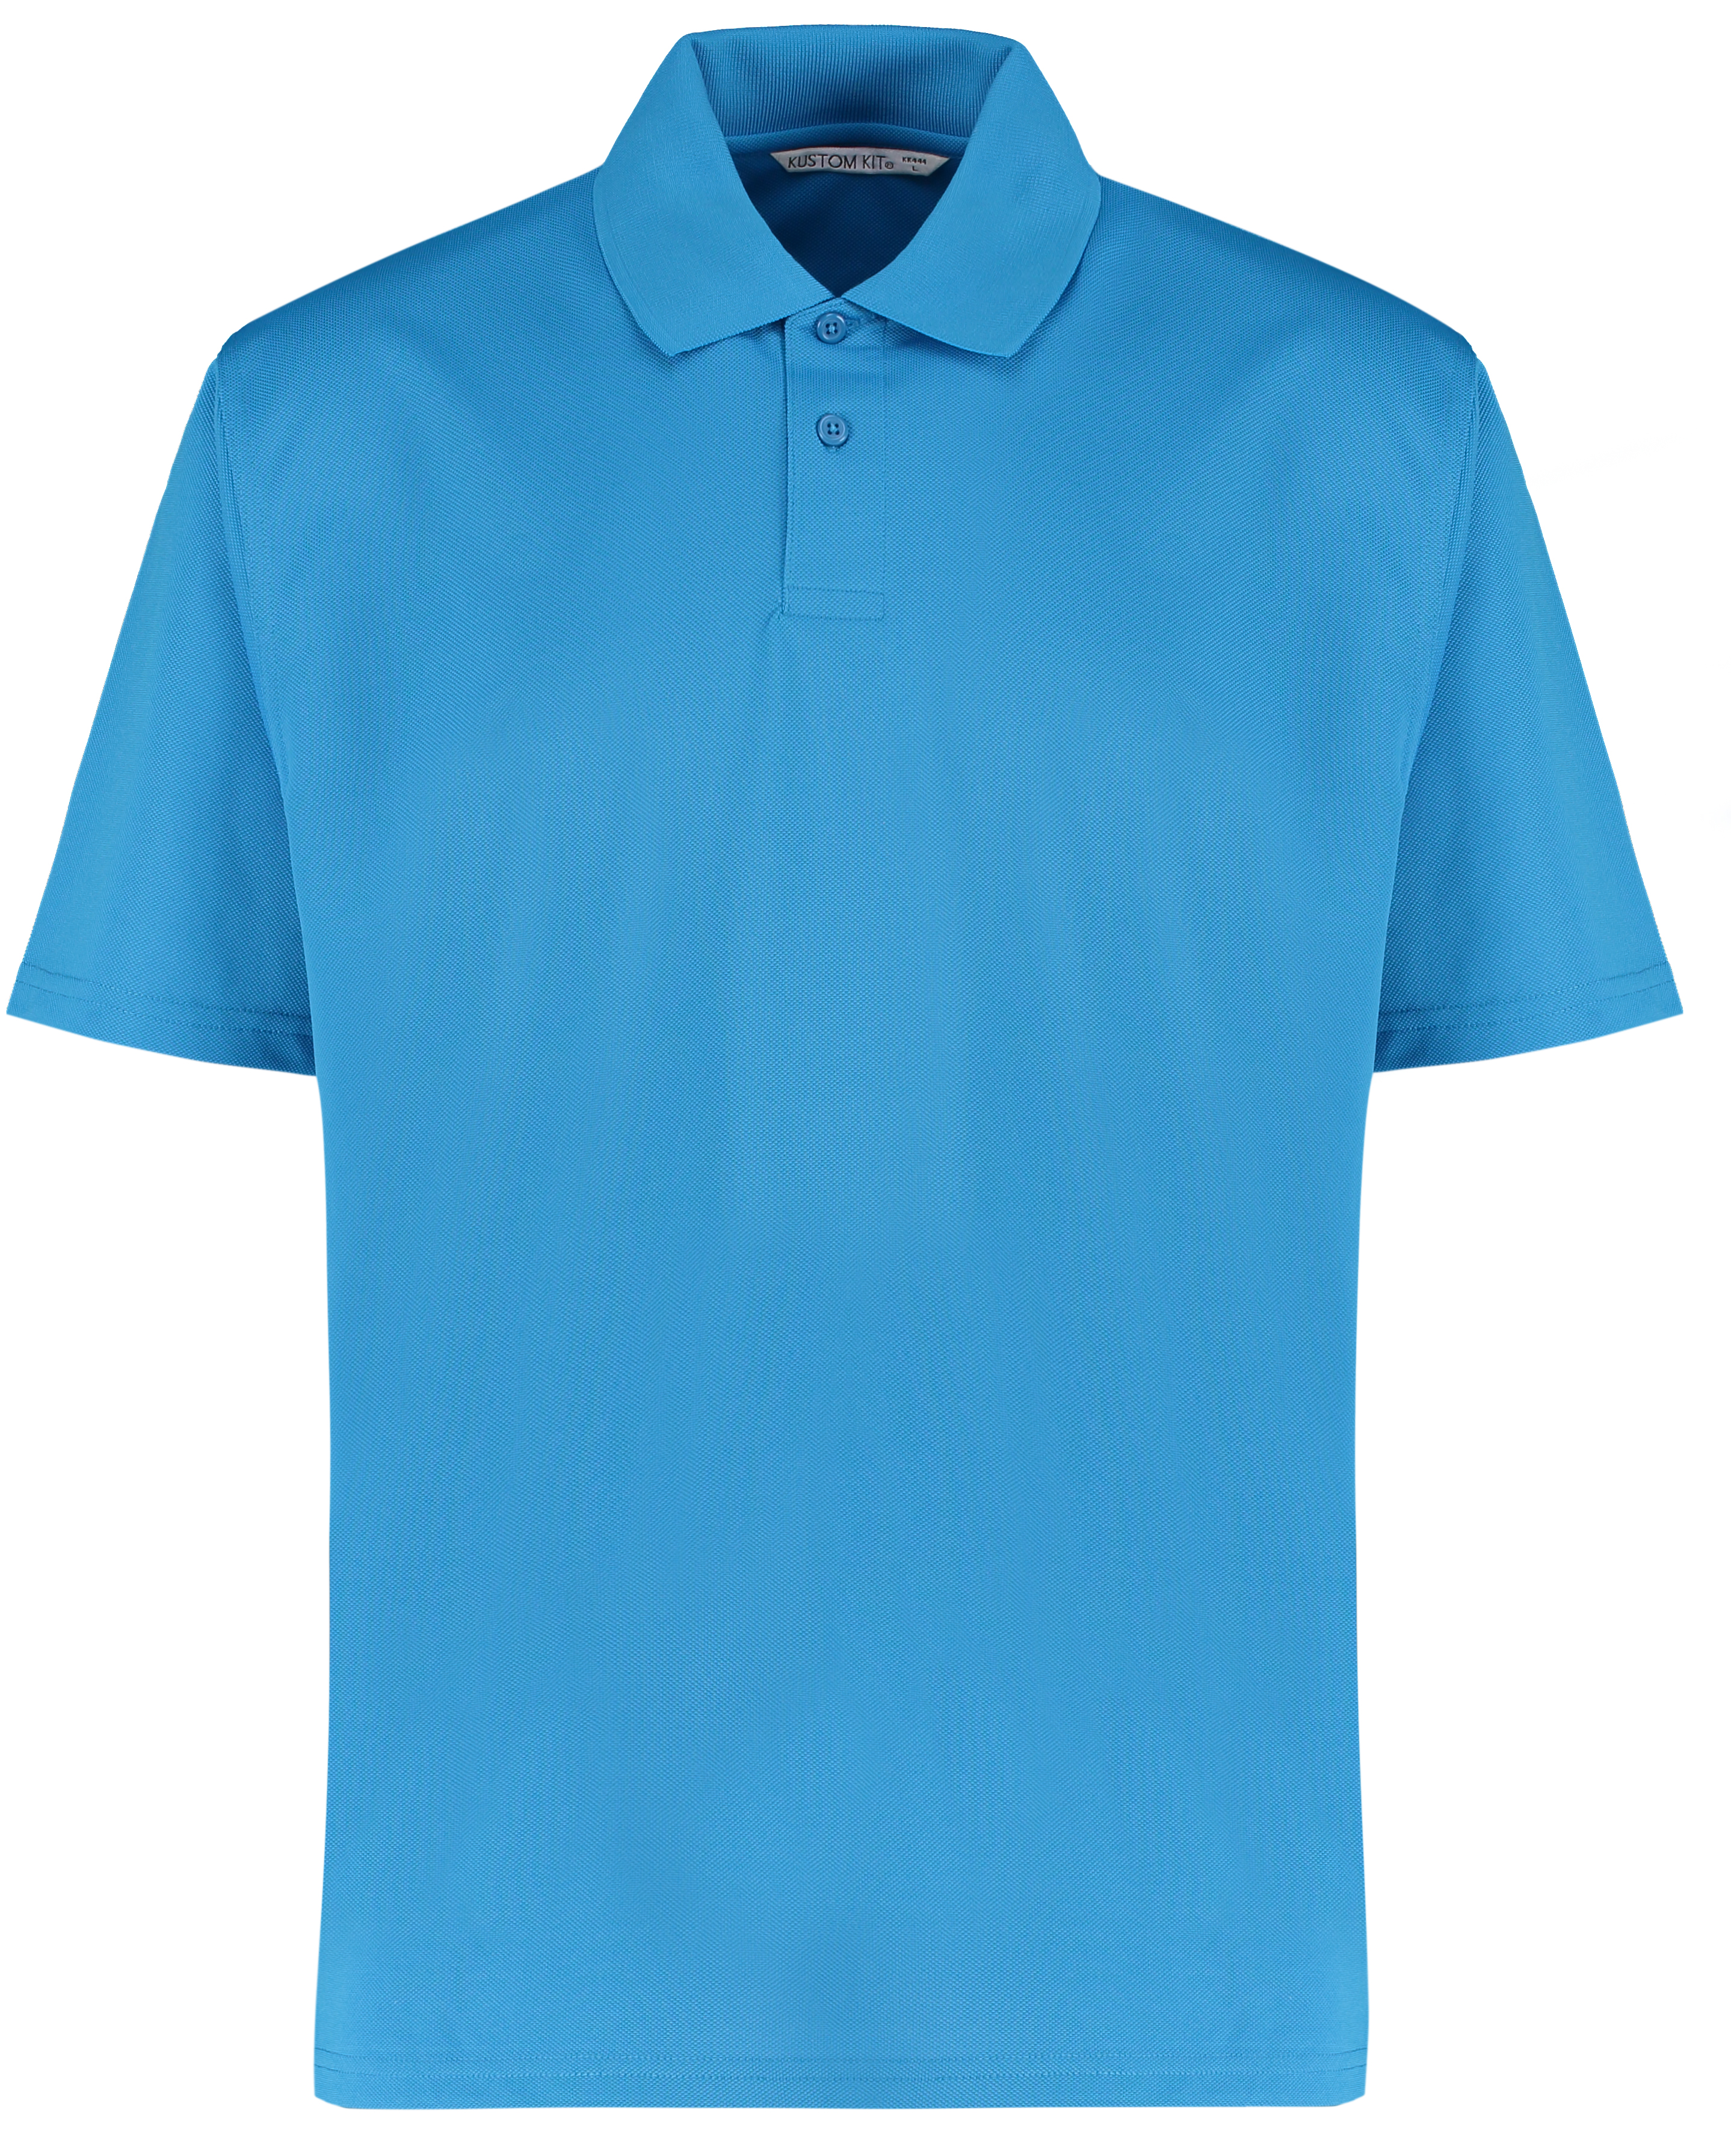 ax-httpswebsystems.s3.amazonaws.comtmp_for_downloadkustom-kit-cooltex-plus-pique-polo-bright-blue.jpg